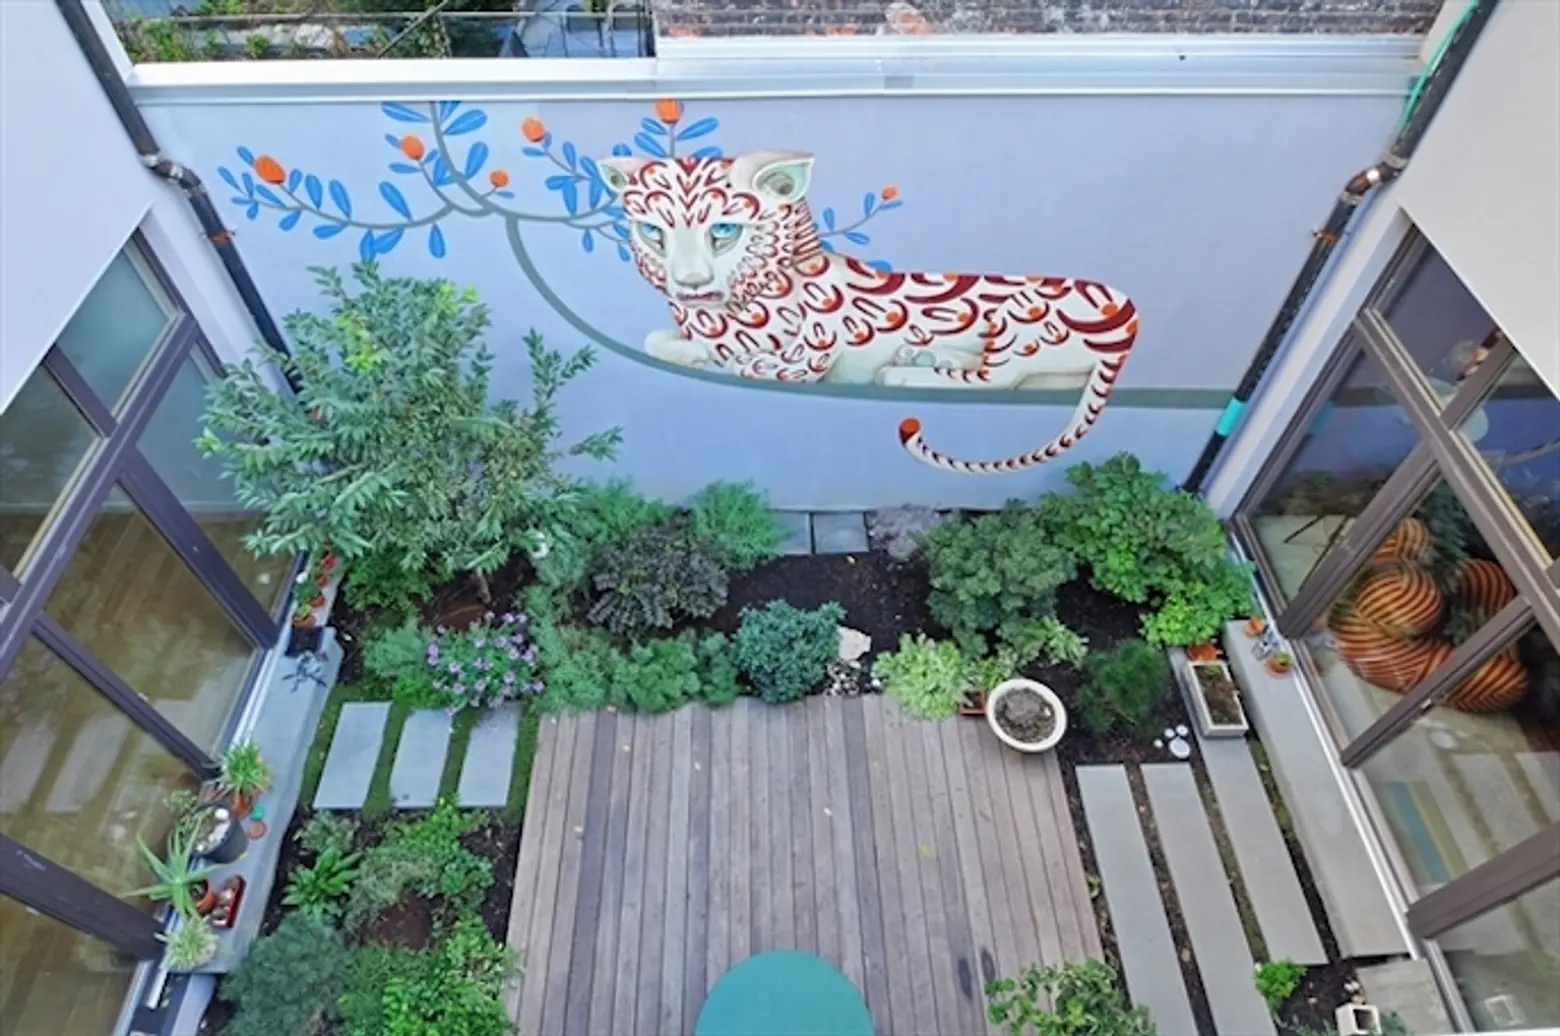 311 South 4th Street, landscaped courtyard by James Stephenson Garden Design, Polina Solovelchik wall mural